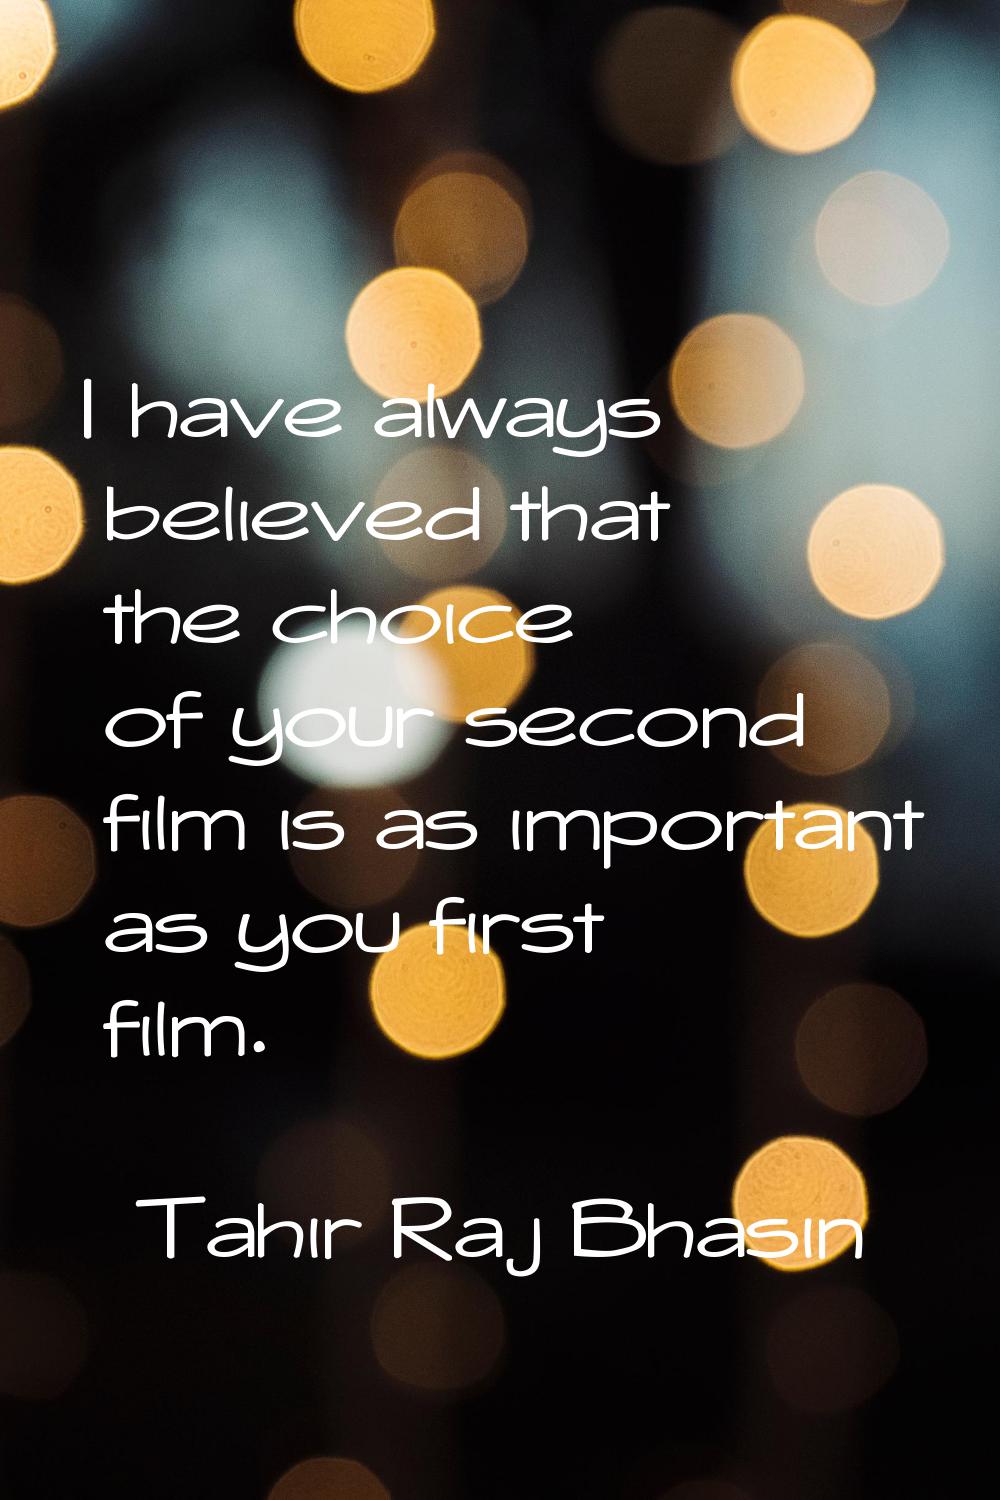 I have always believed that the choice of your second film is as important as you first film.